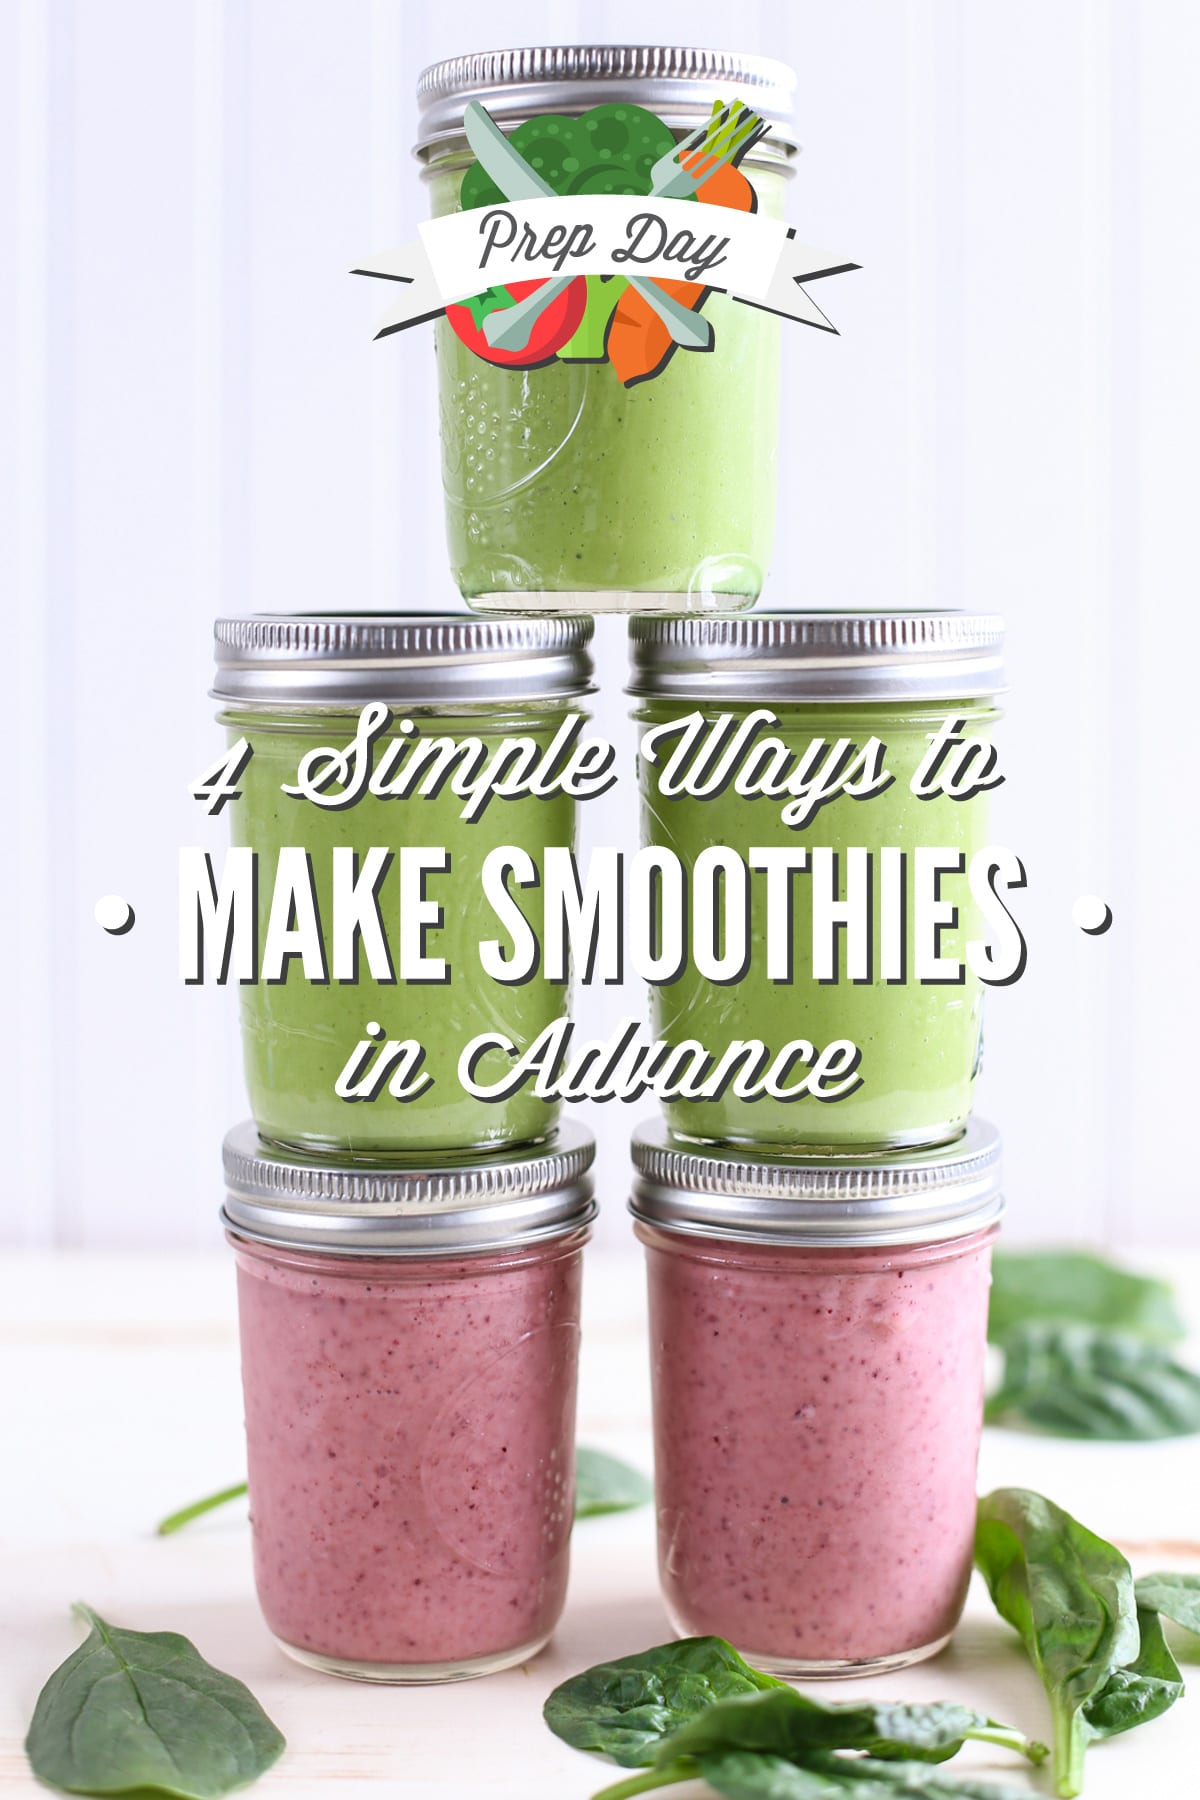 https://livesimply.me/wp-content/uploads/2015/08/Prep-Day-4-Simple-Ways-to-Make-Smoothies-in-Advance.jpg